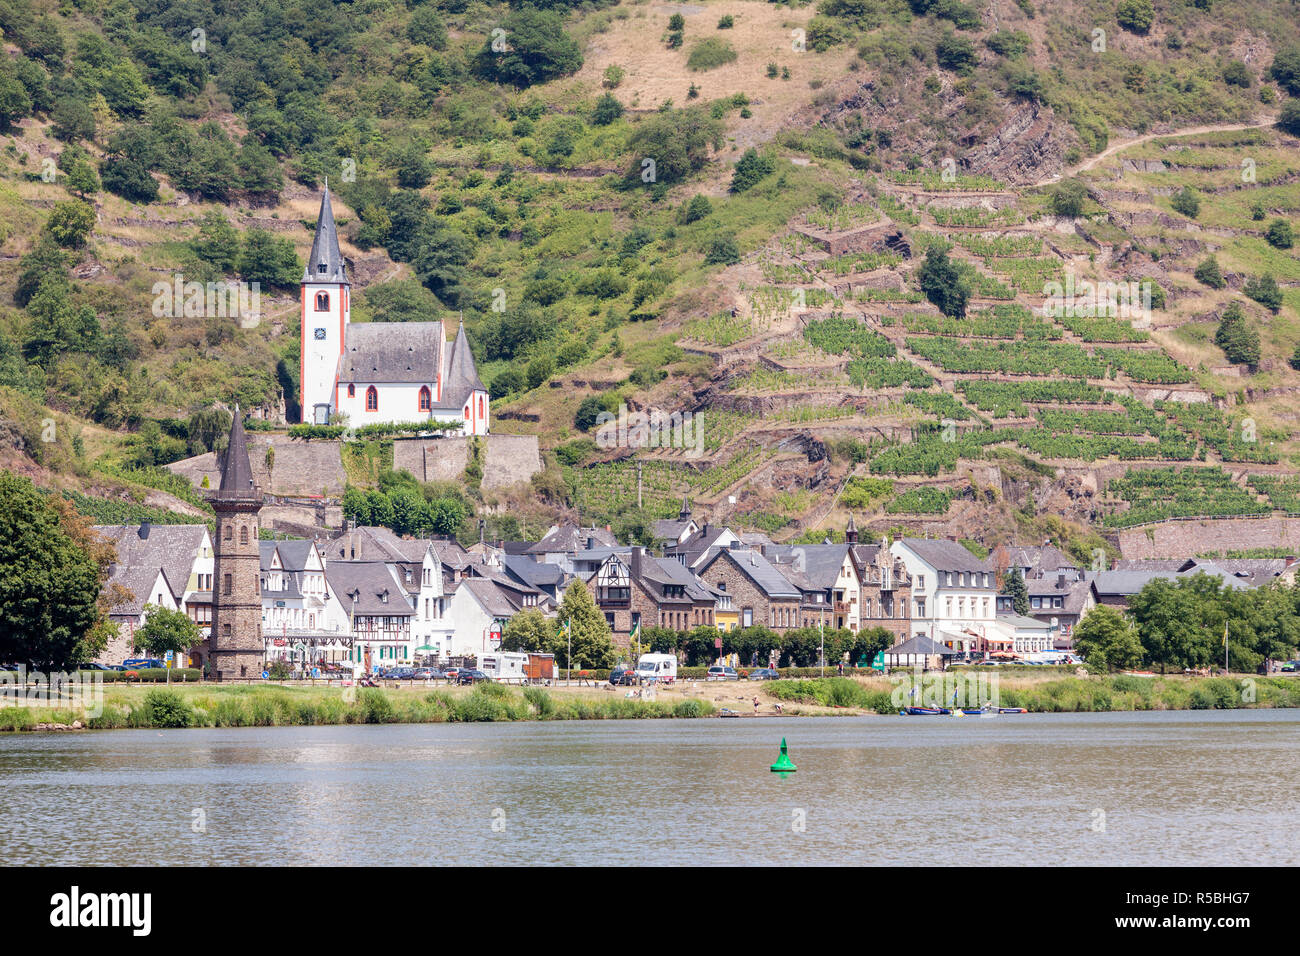 Hatzenport, Germany, on the Moselle.  St. Johannes Church.  Small Vineyards on Steep Hillsides behind the Town. Stock Photo